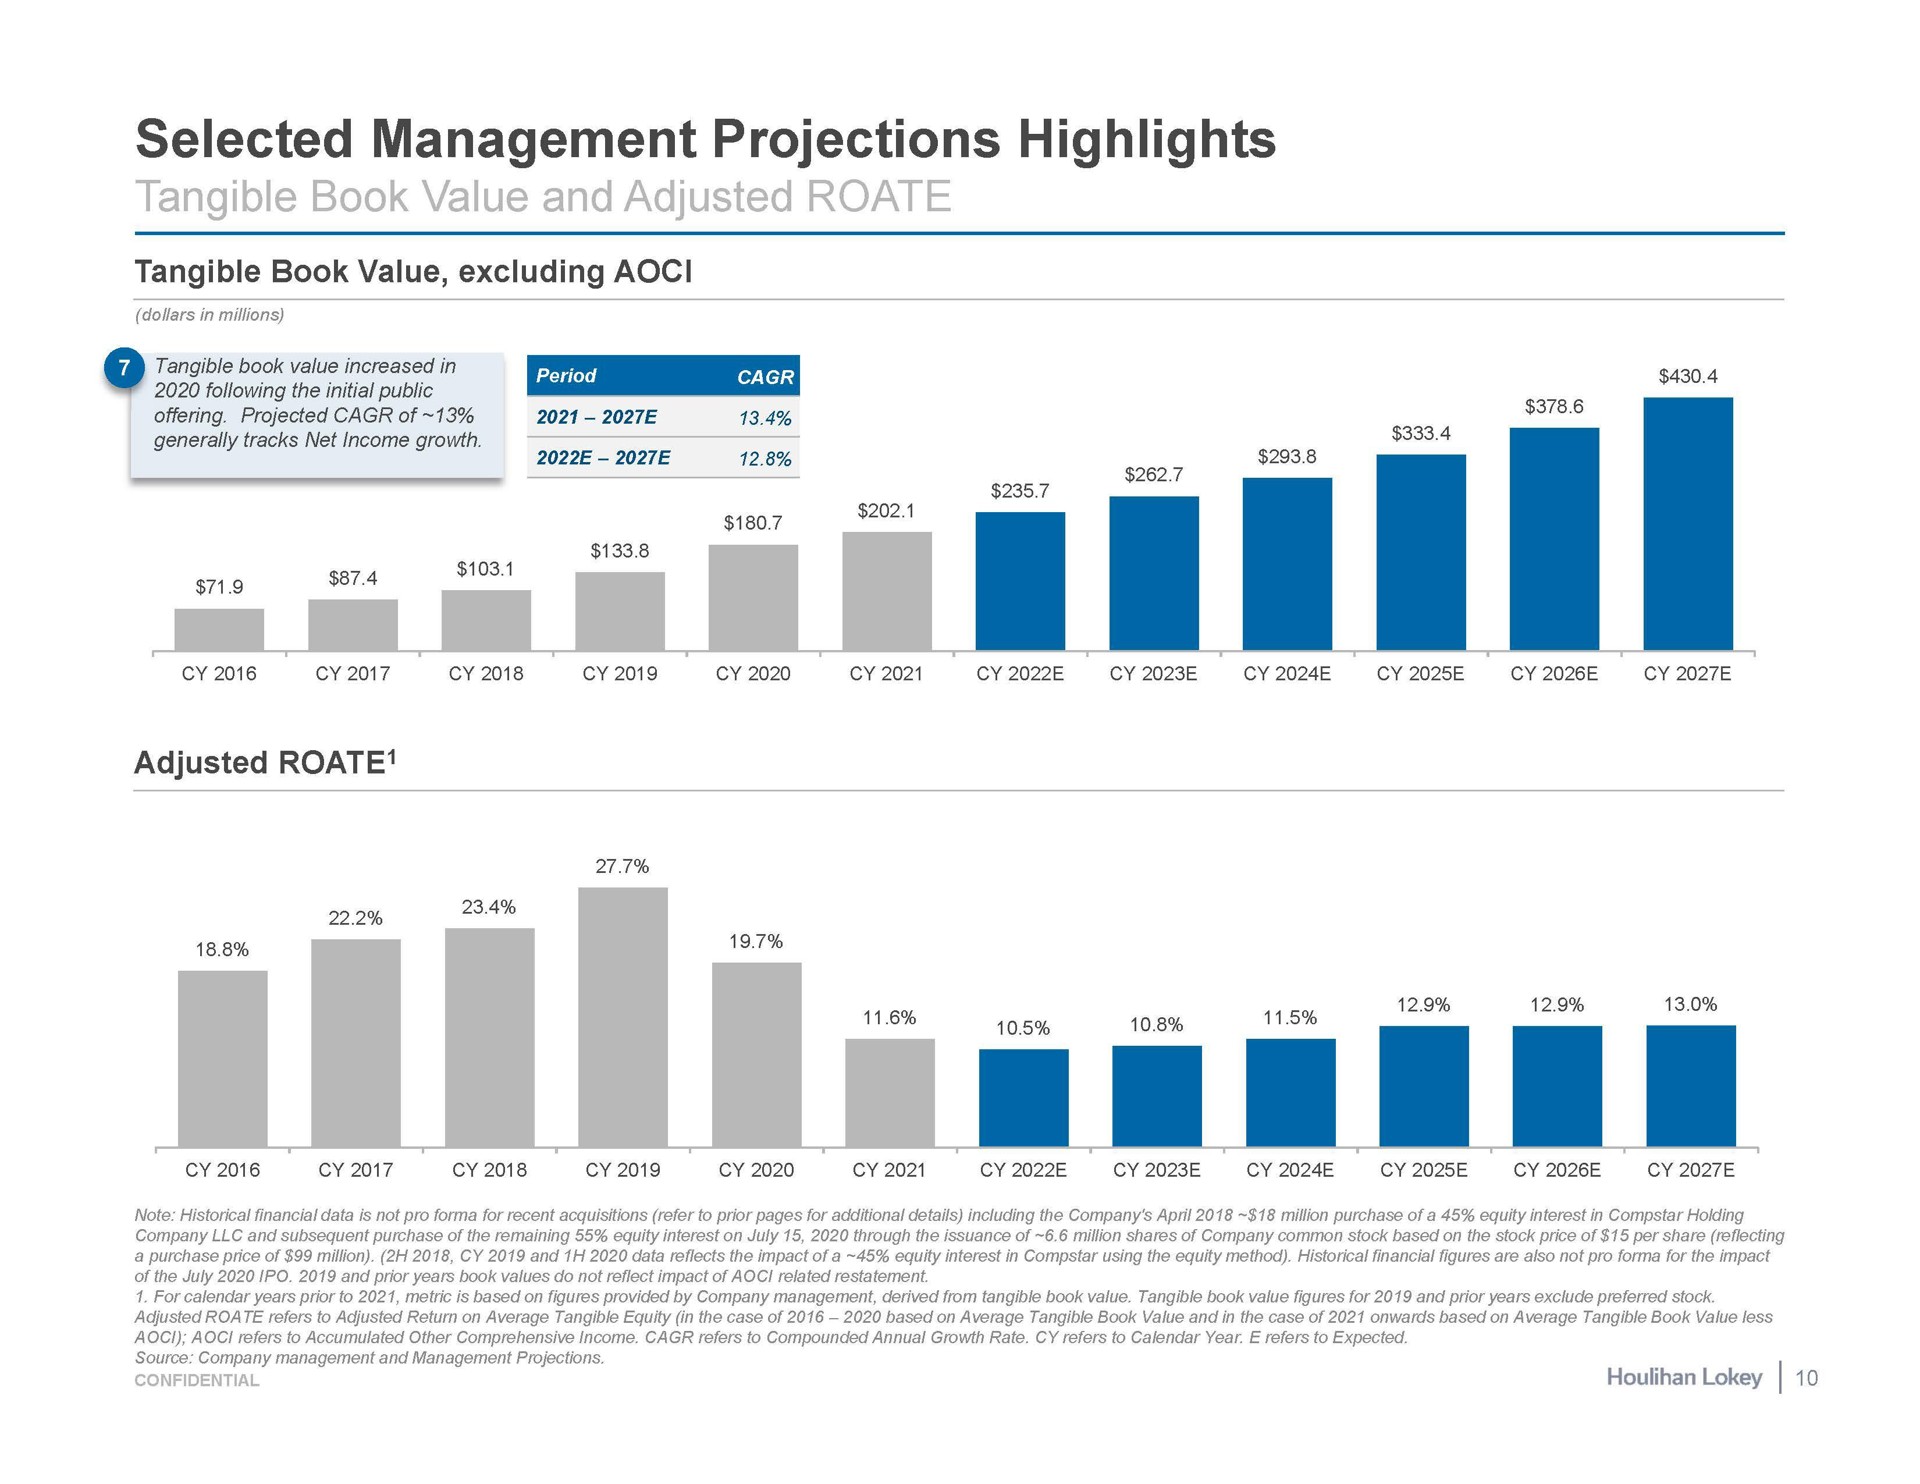 selected management projections highlights tangible book value excluding adjusted | Houlihan Lokey